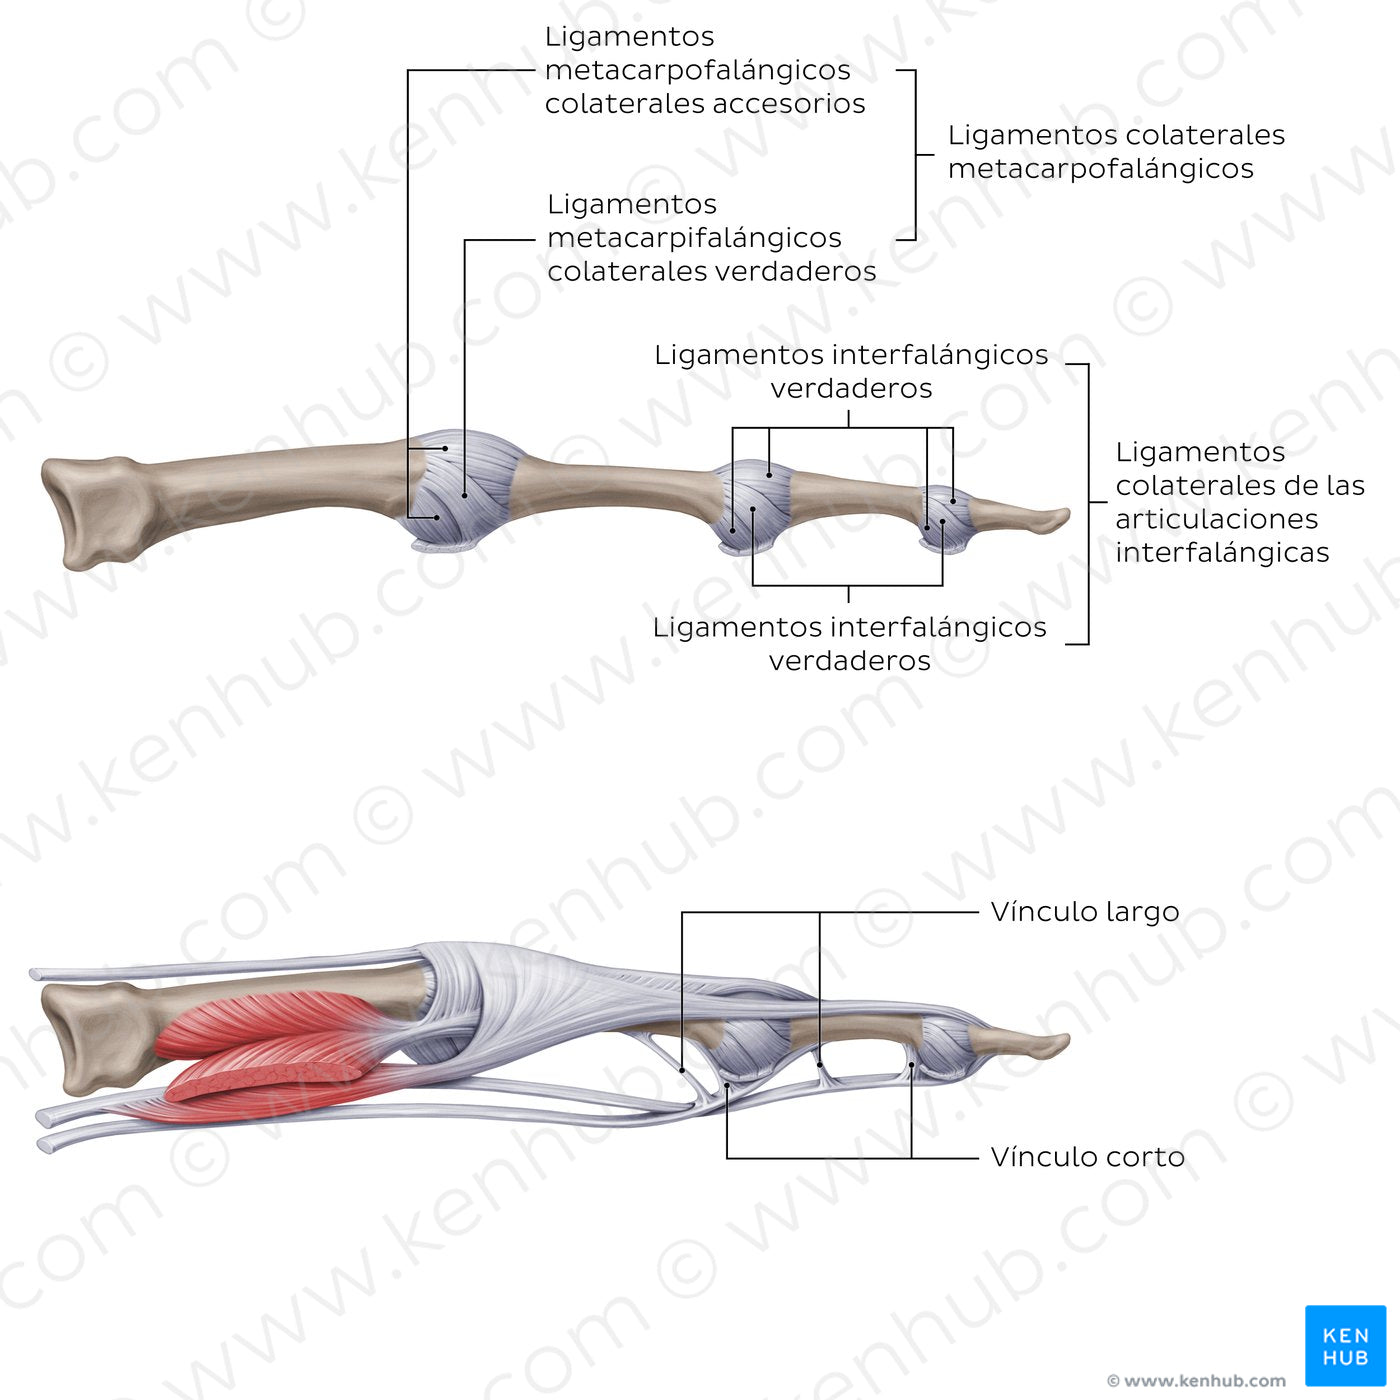 Ligaments of the metacarpals and phalanges: Lateral view (Spanish)